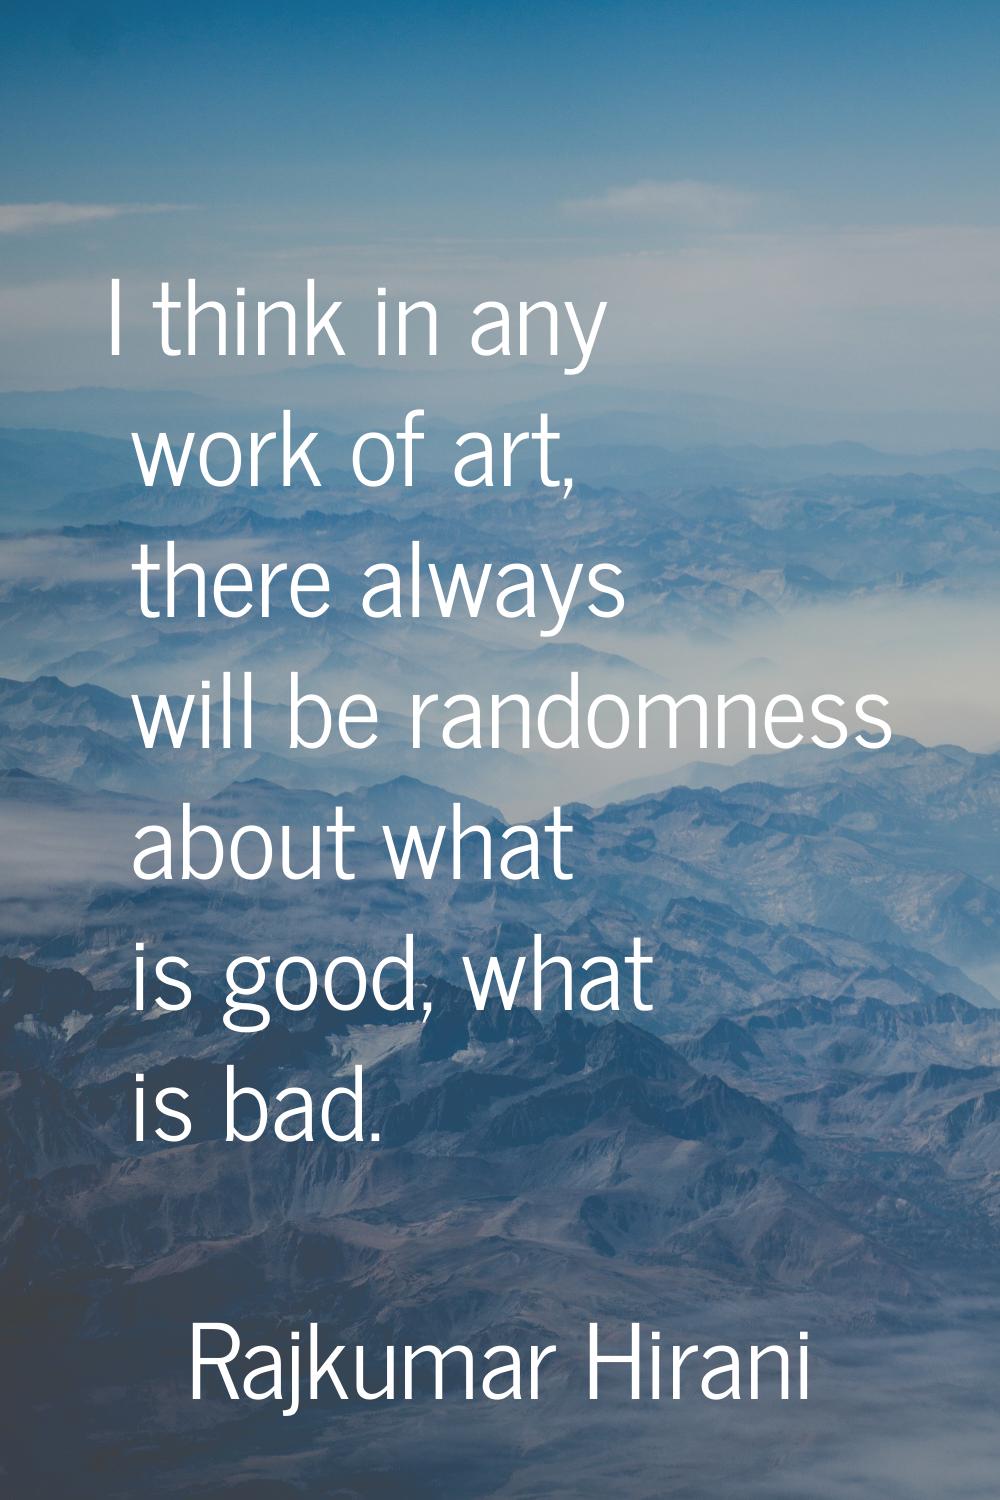 I think in any work of art, there always will be randomness about what is good, what is bad.